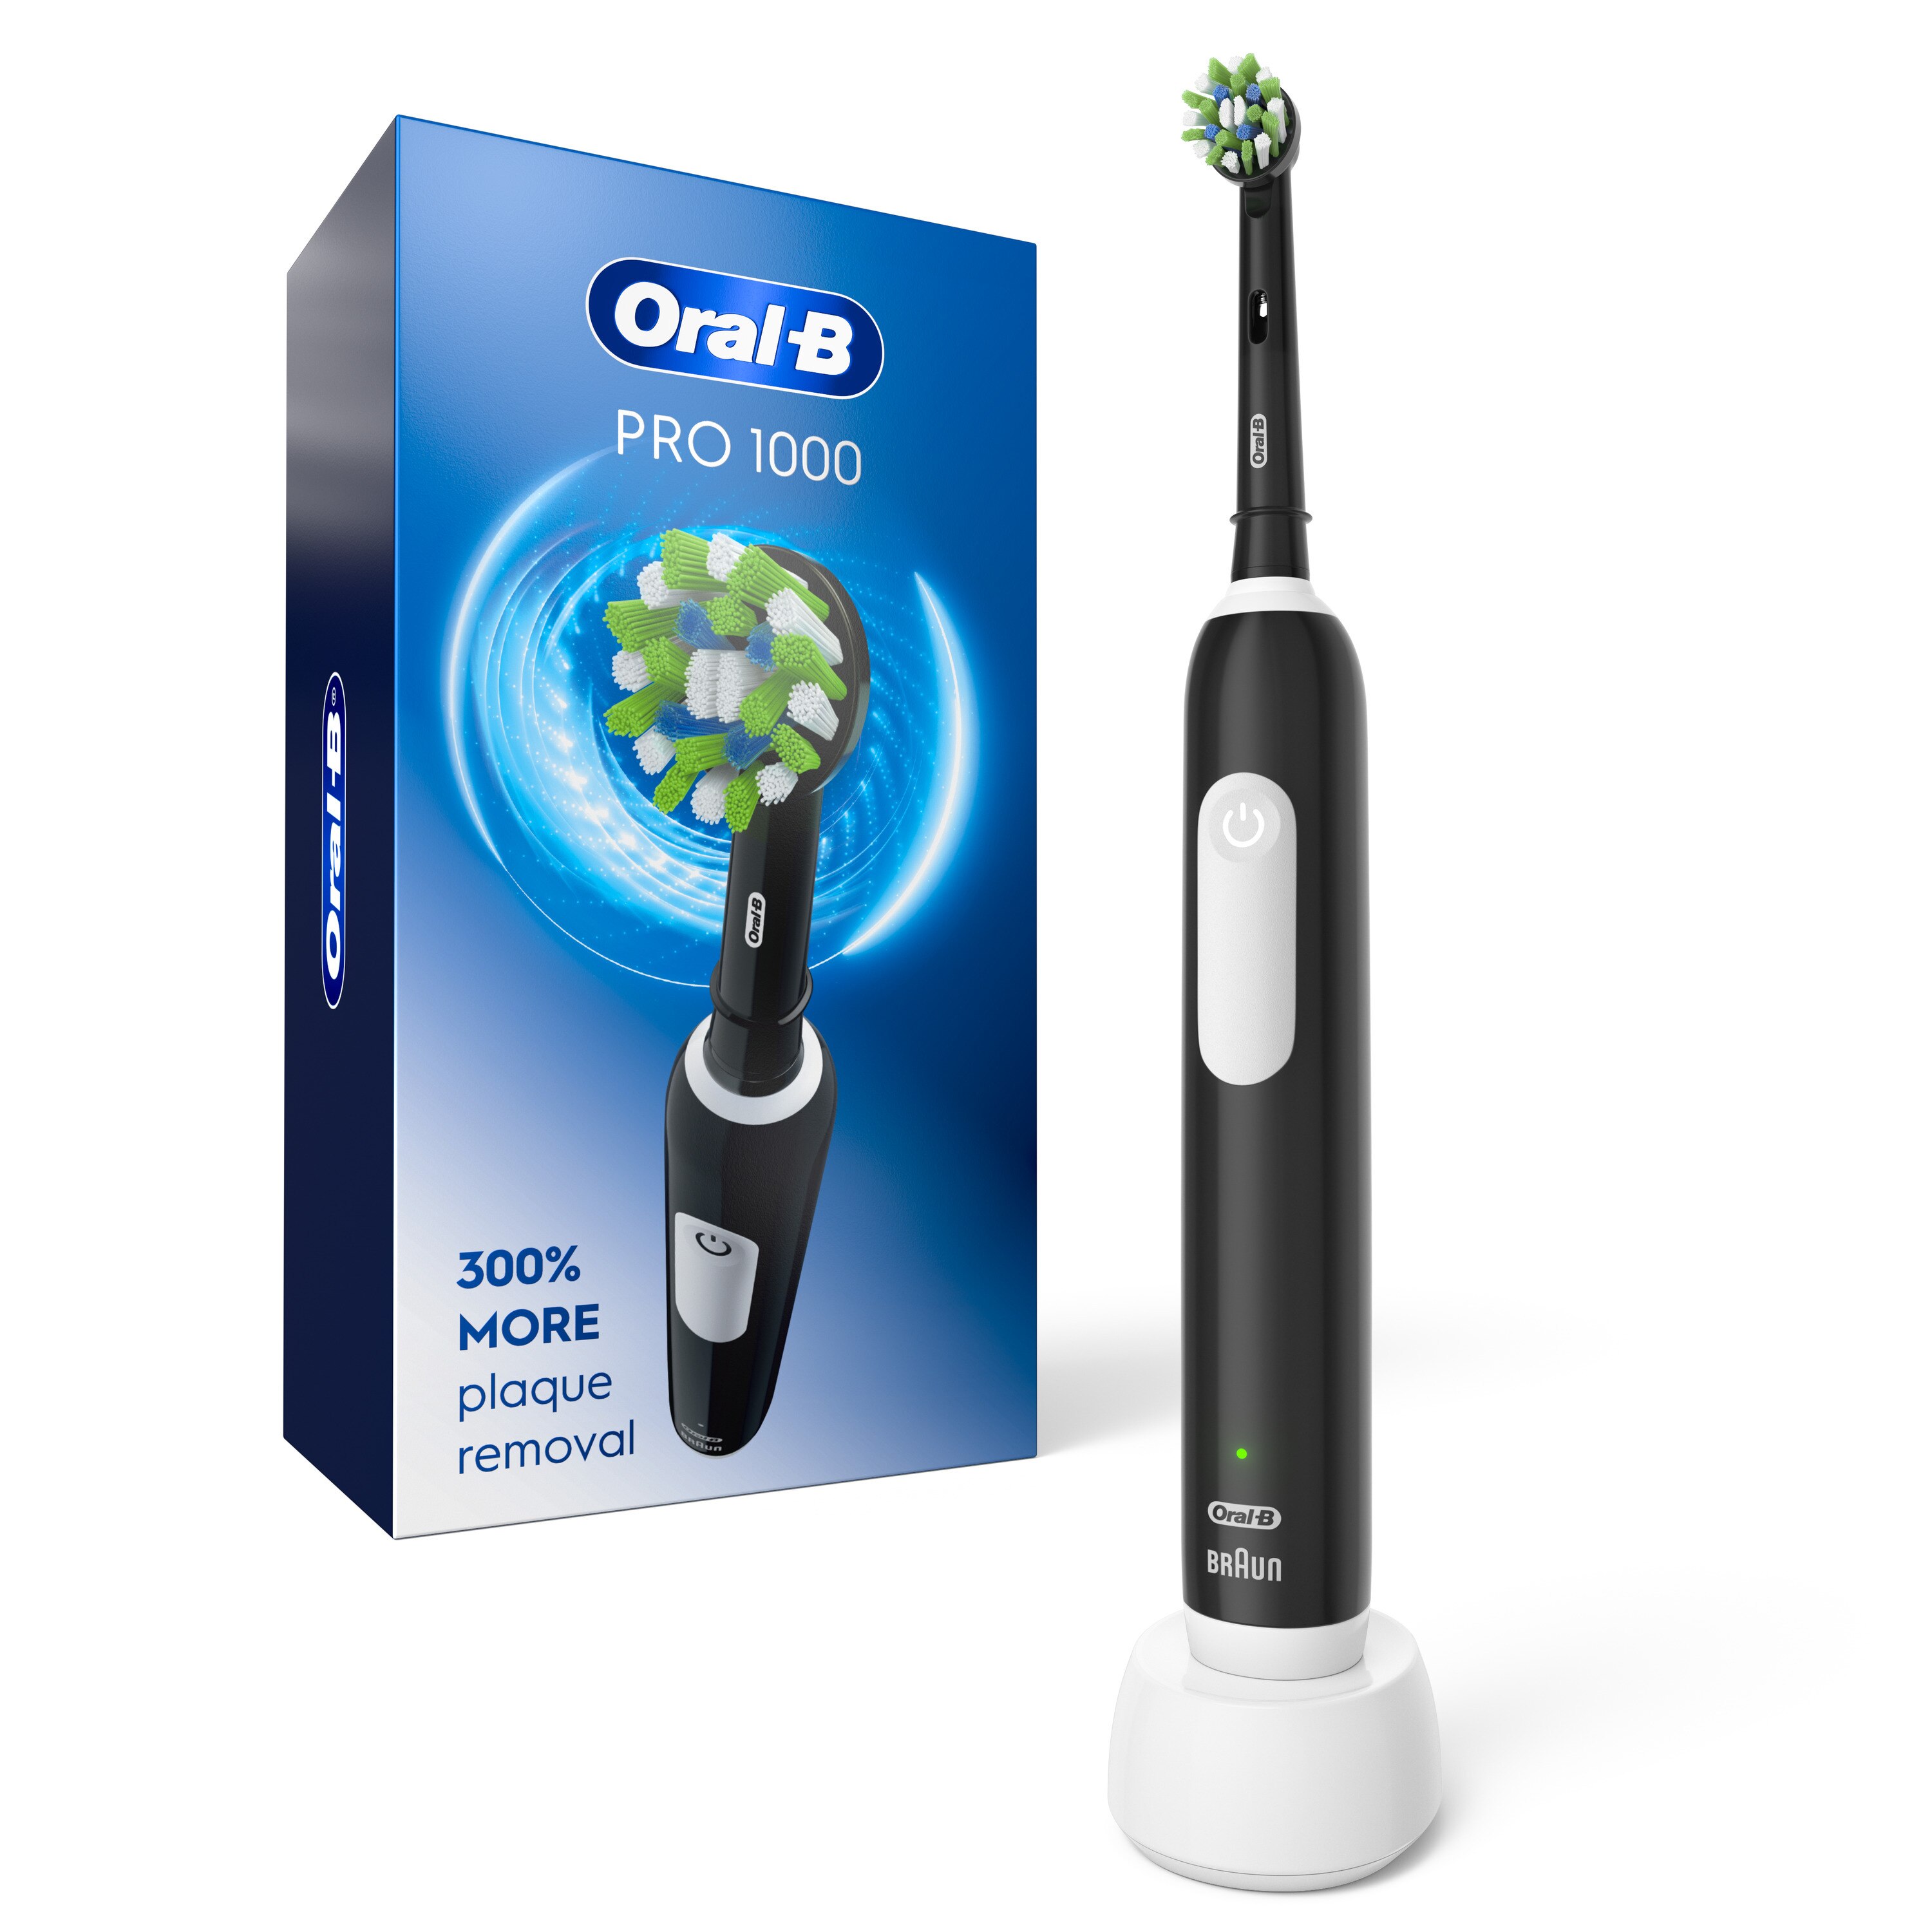 Pronounce approve comb Oral-B Pro 1000 Electric Toothbrush, Black | Pick Up In Store TODAY at CVS